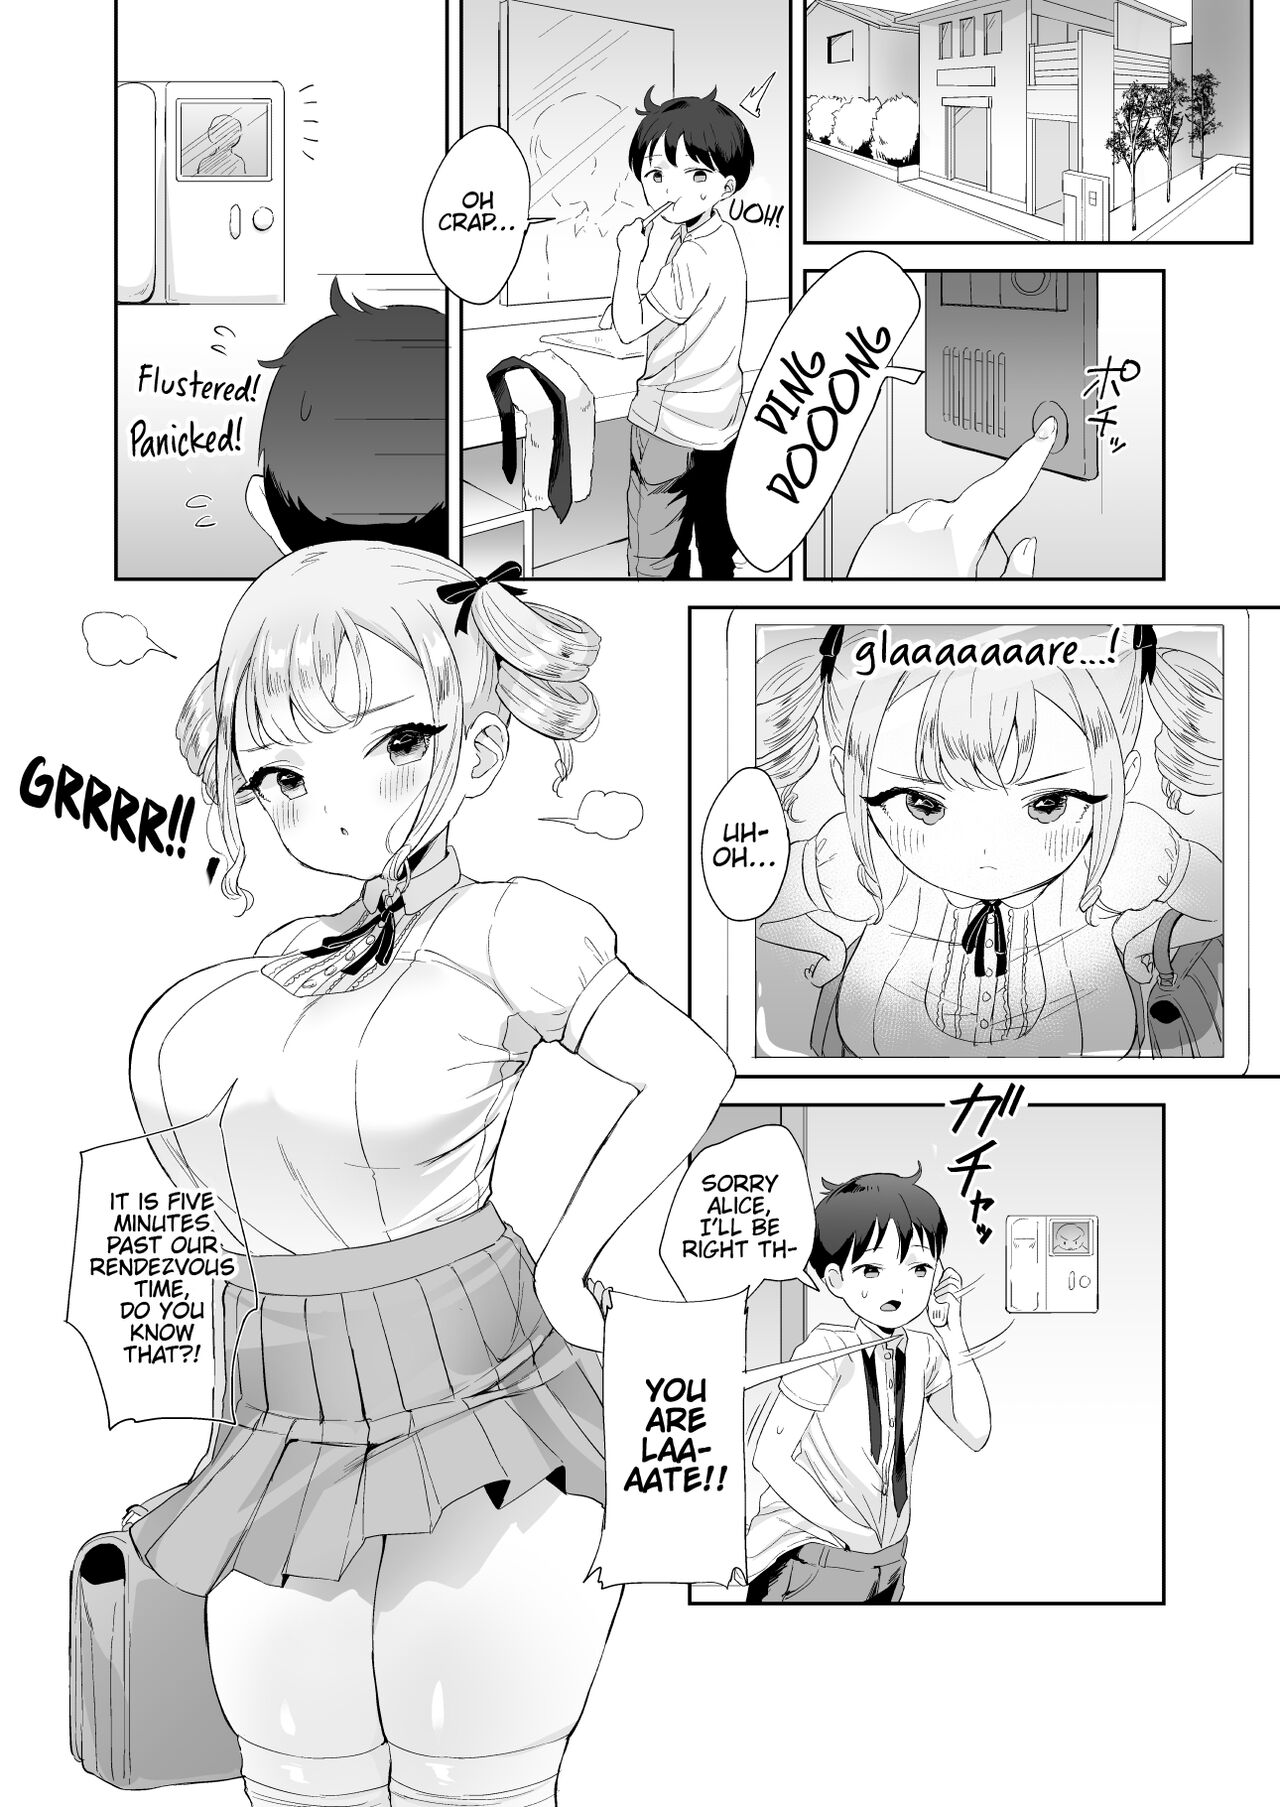 Doing Whatever The Hell I Want To Some Clueless Little Princess Ushinomiya Porn Comic